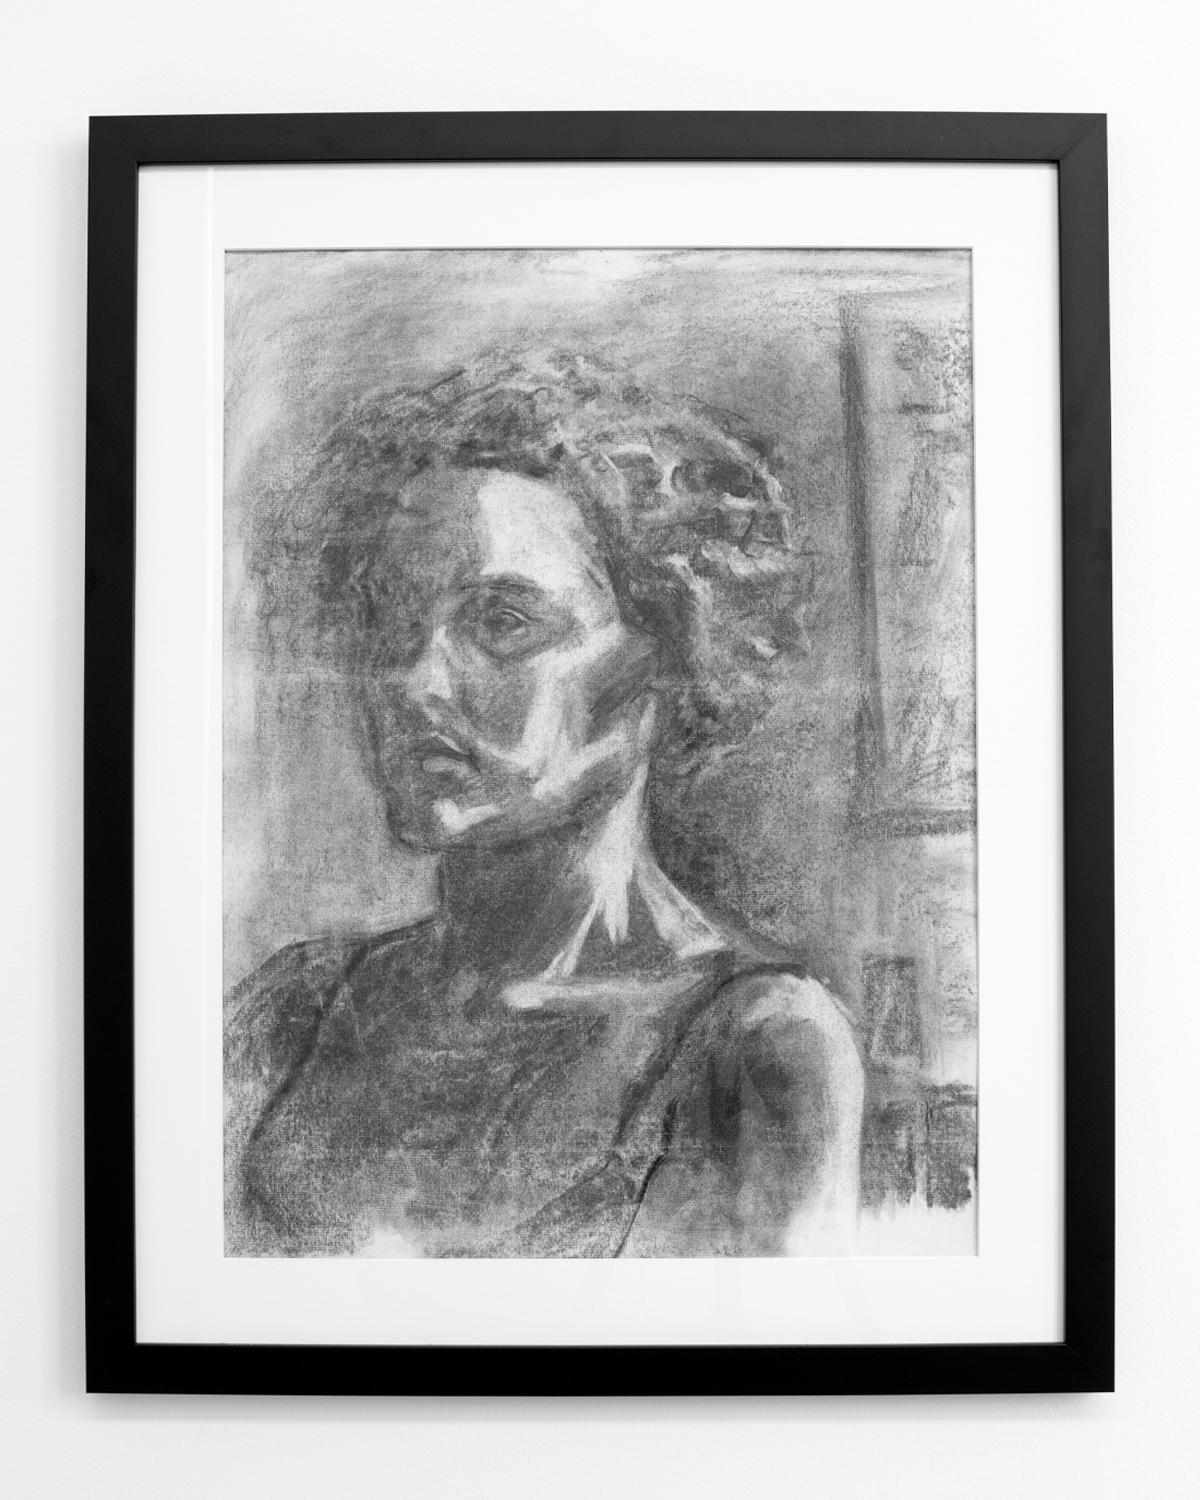 Framed Charcoal Drawing Portrait of a Woman - Naturalistic Art by Unknown